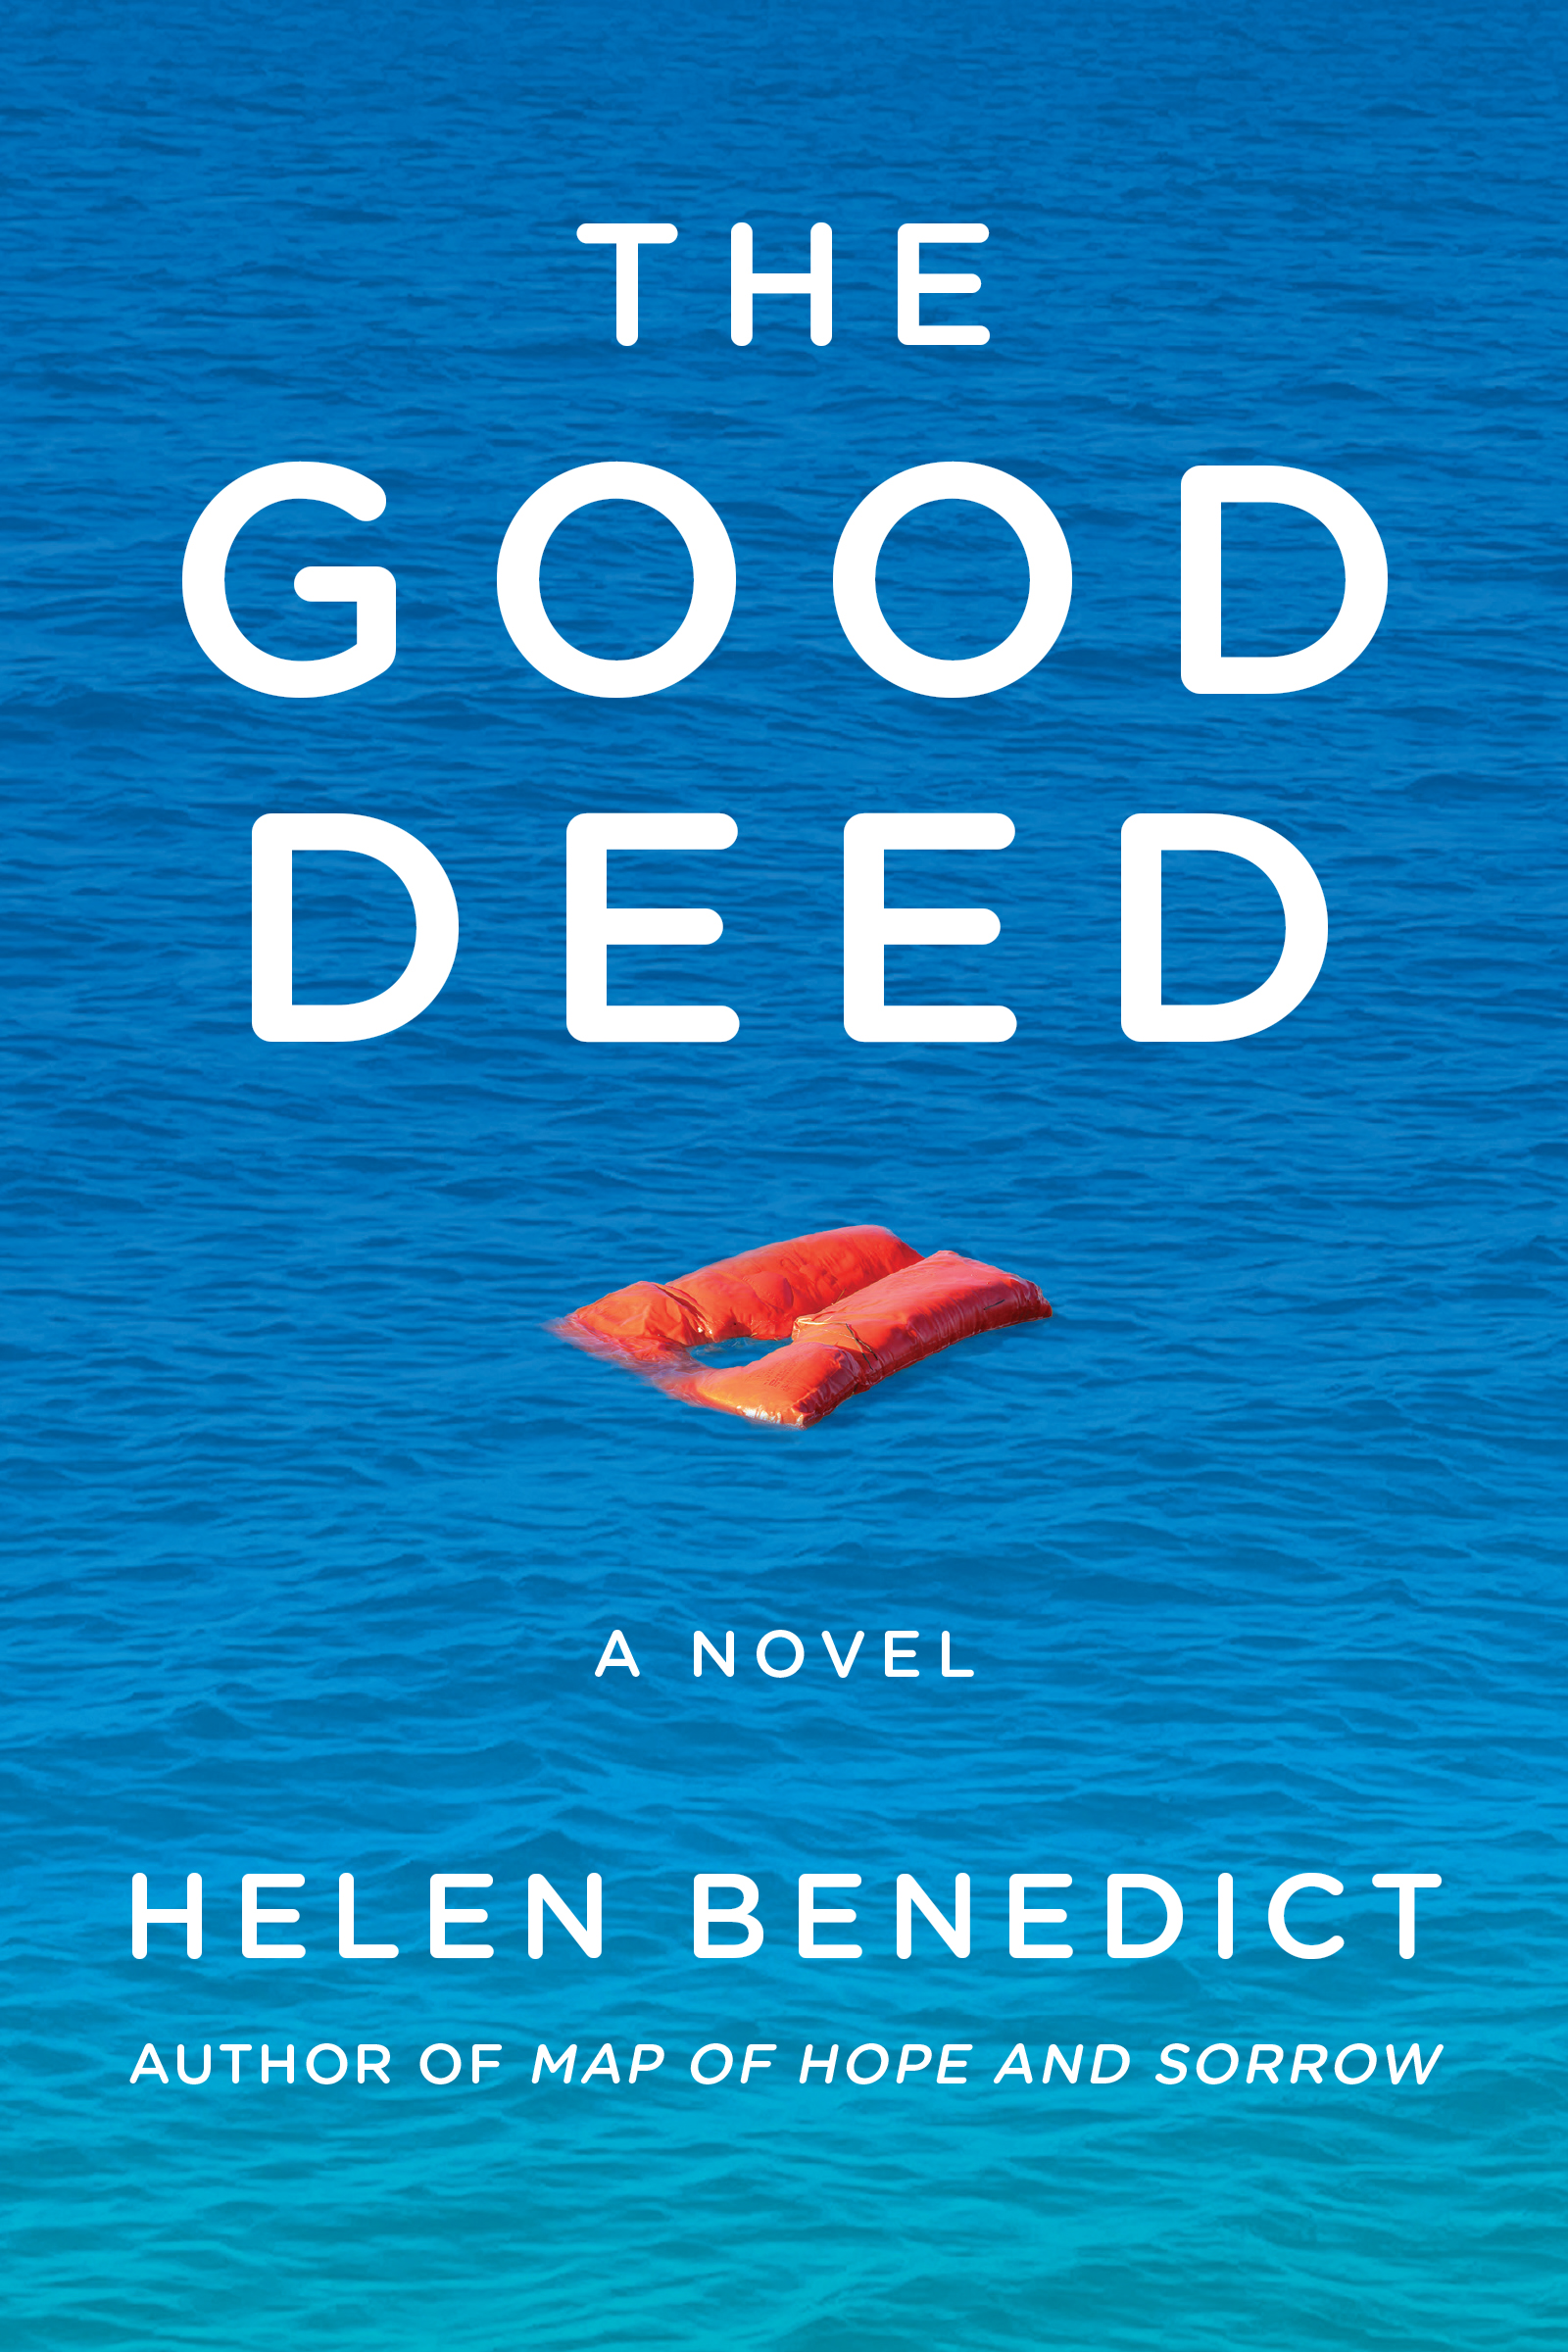 A photograph of a lifejacket floating the an expanse of ocean, with white text reading "The Good Deed, a novel, Helen Benedict"